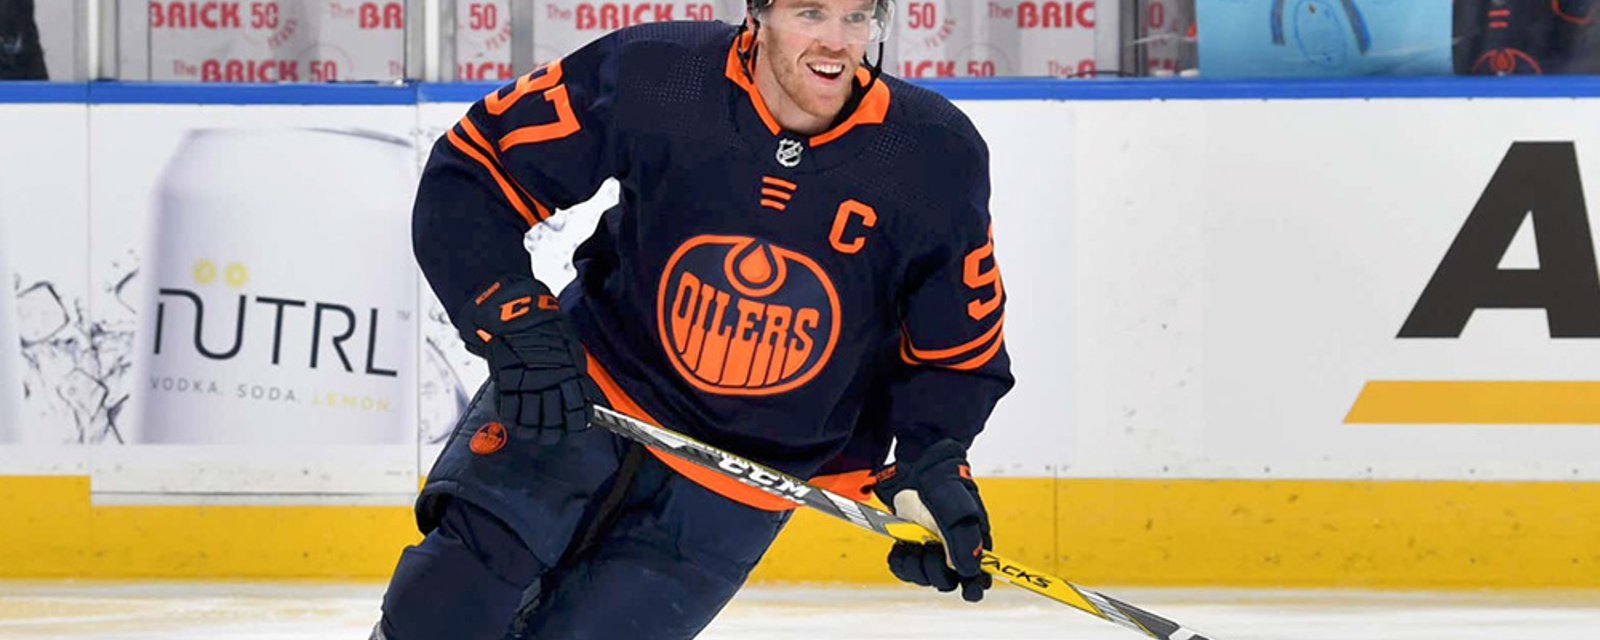 Flashback: Connor McDavid compares his game to unlikely figure! 